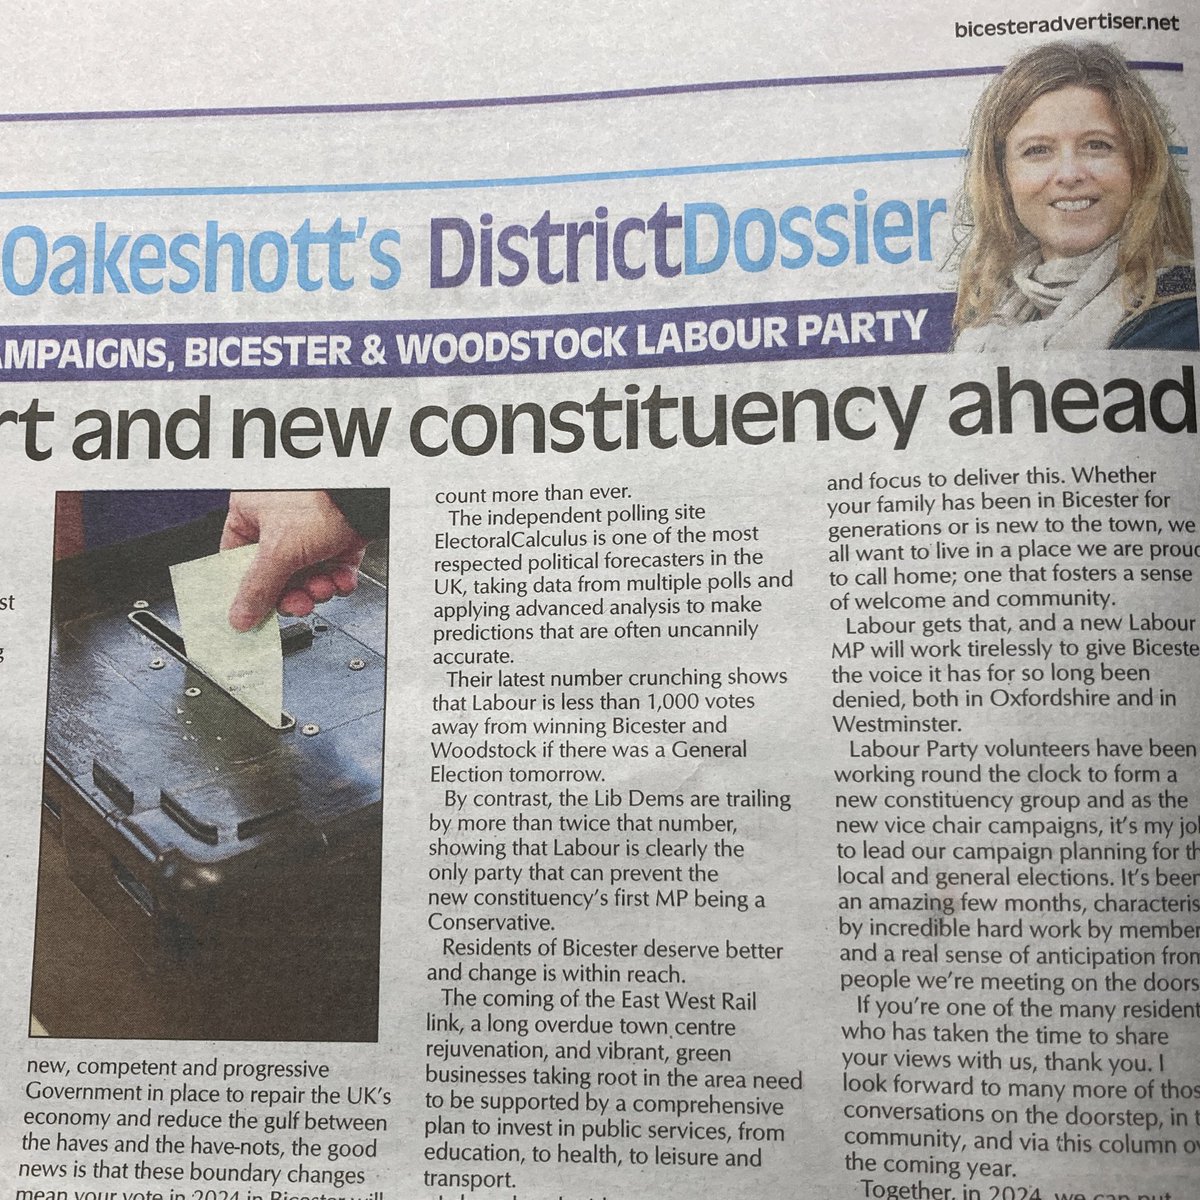 Read my article - first printed in the Bicester Advertiser - to find out why this year’s elections will be different for those of us who live in #BicesterAndWoodstock and why there’s real hope we can wave goodbye to Tory neglect & start fixing Britain. veronicaoakeshott.com/post/bicester-… 🌹